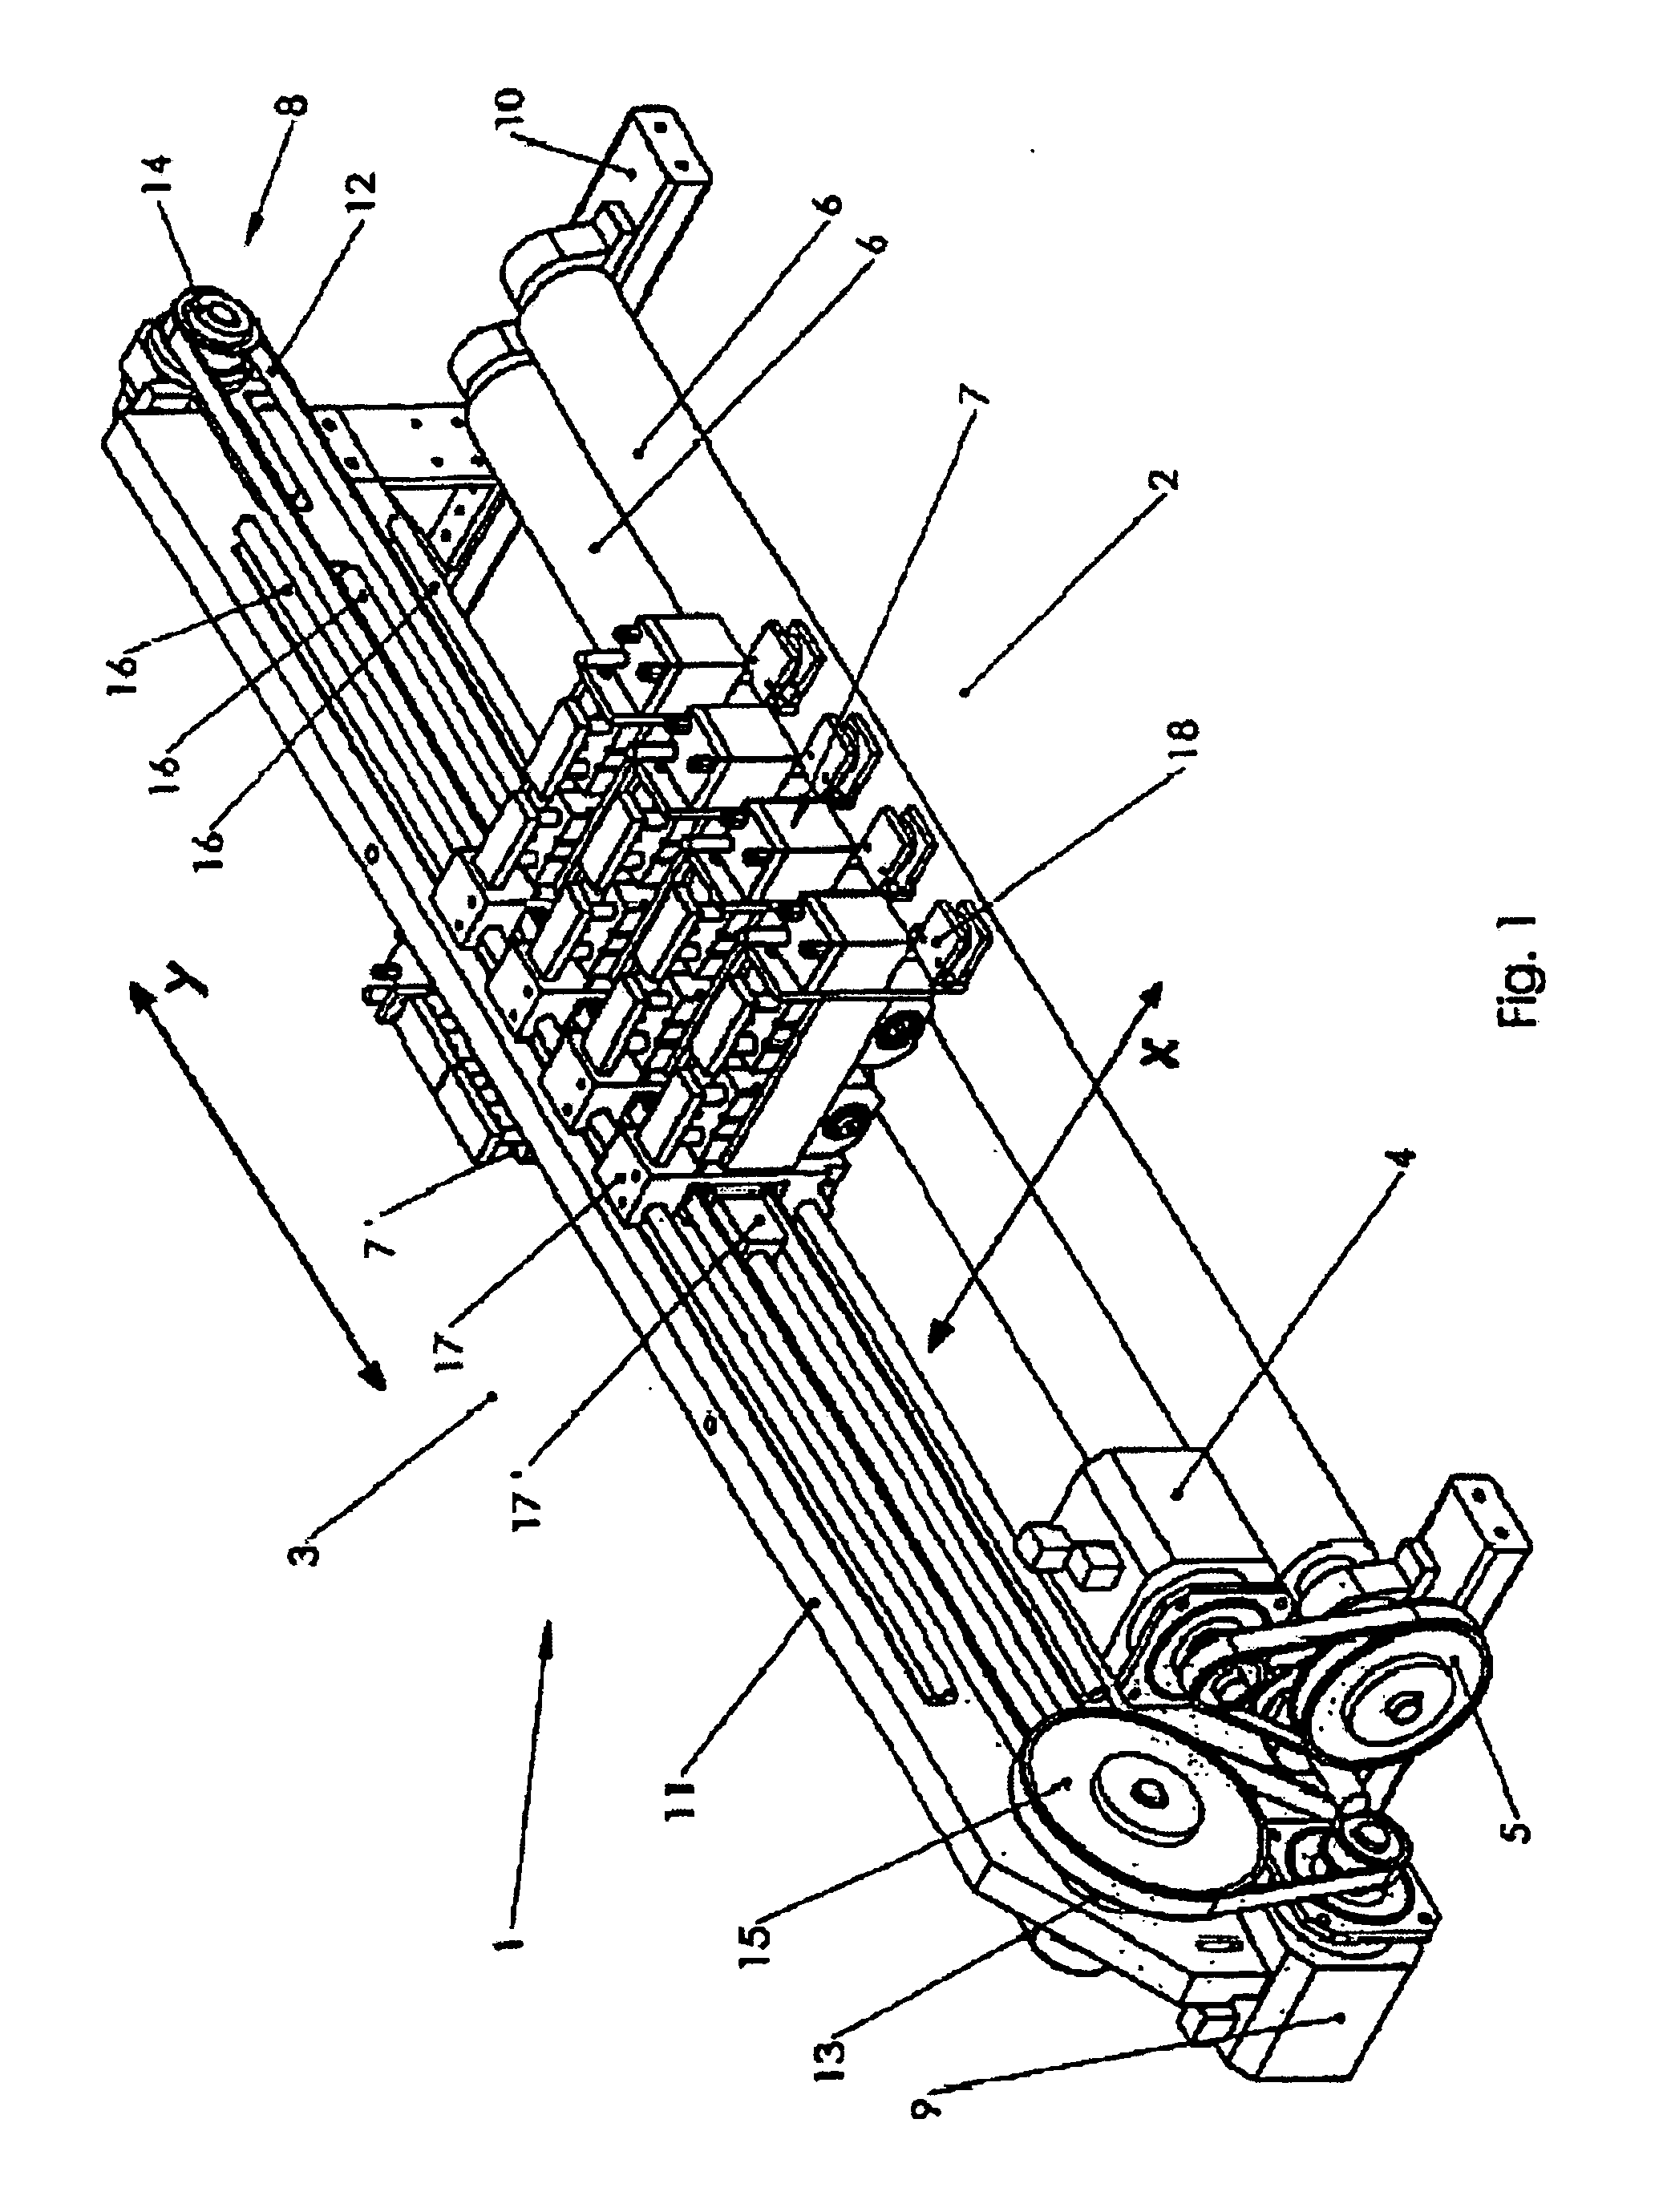 Apparatus for the positioning of a tool or a tool holder in a machine designed for processing a sheet material